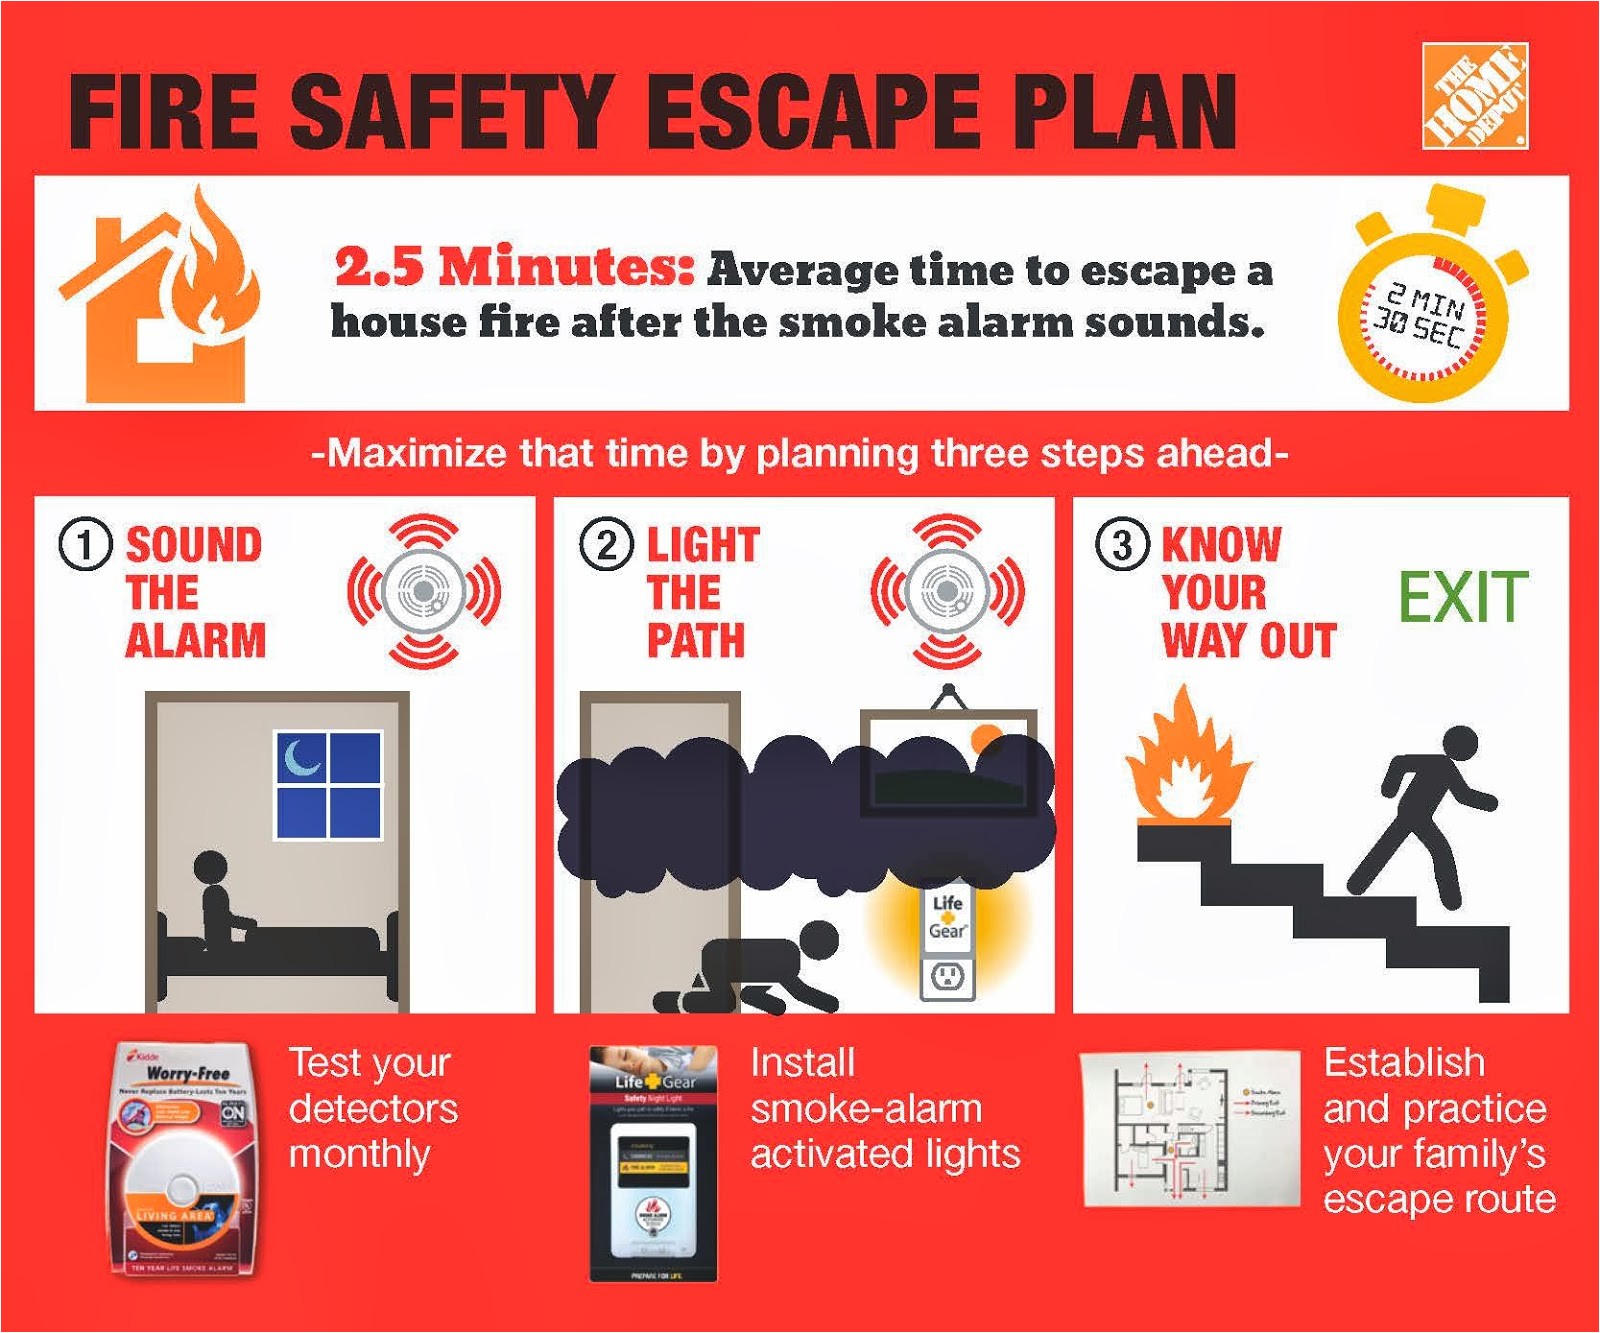 stay safe with fire safety tips from